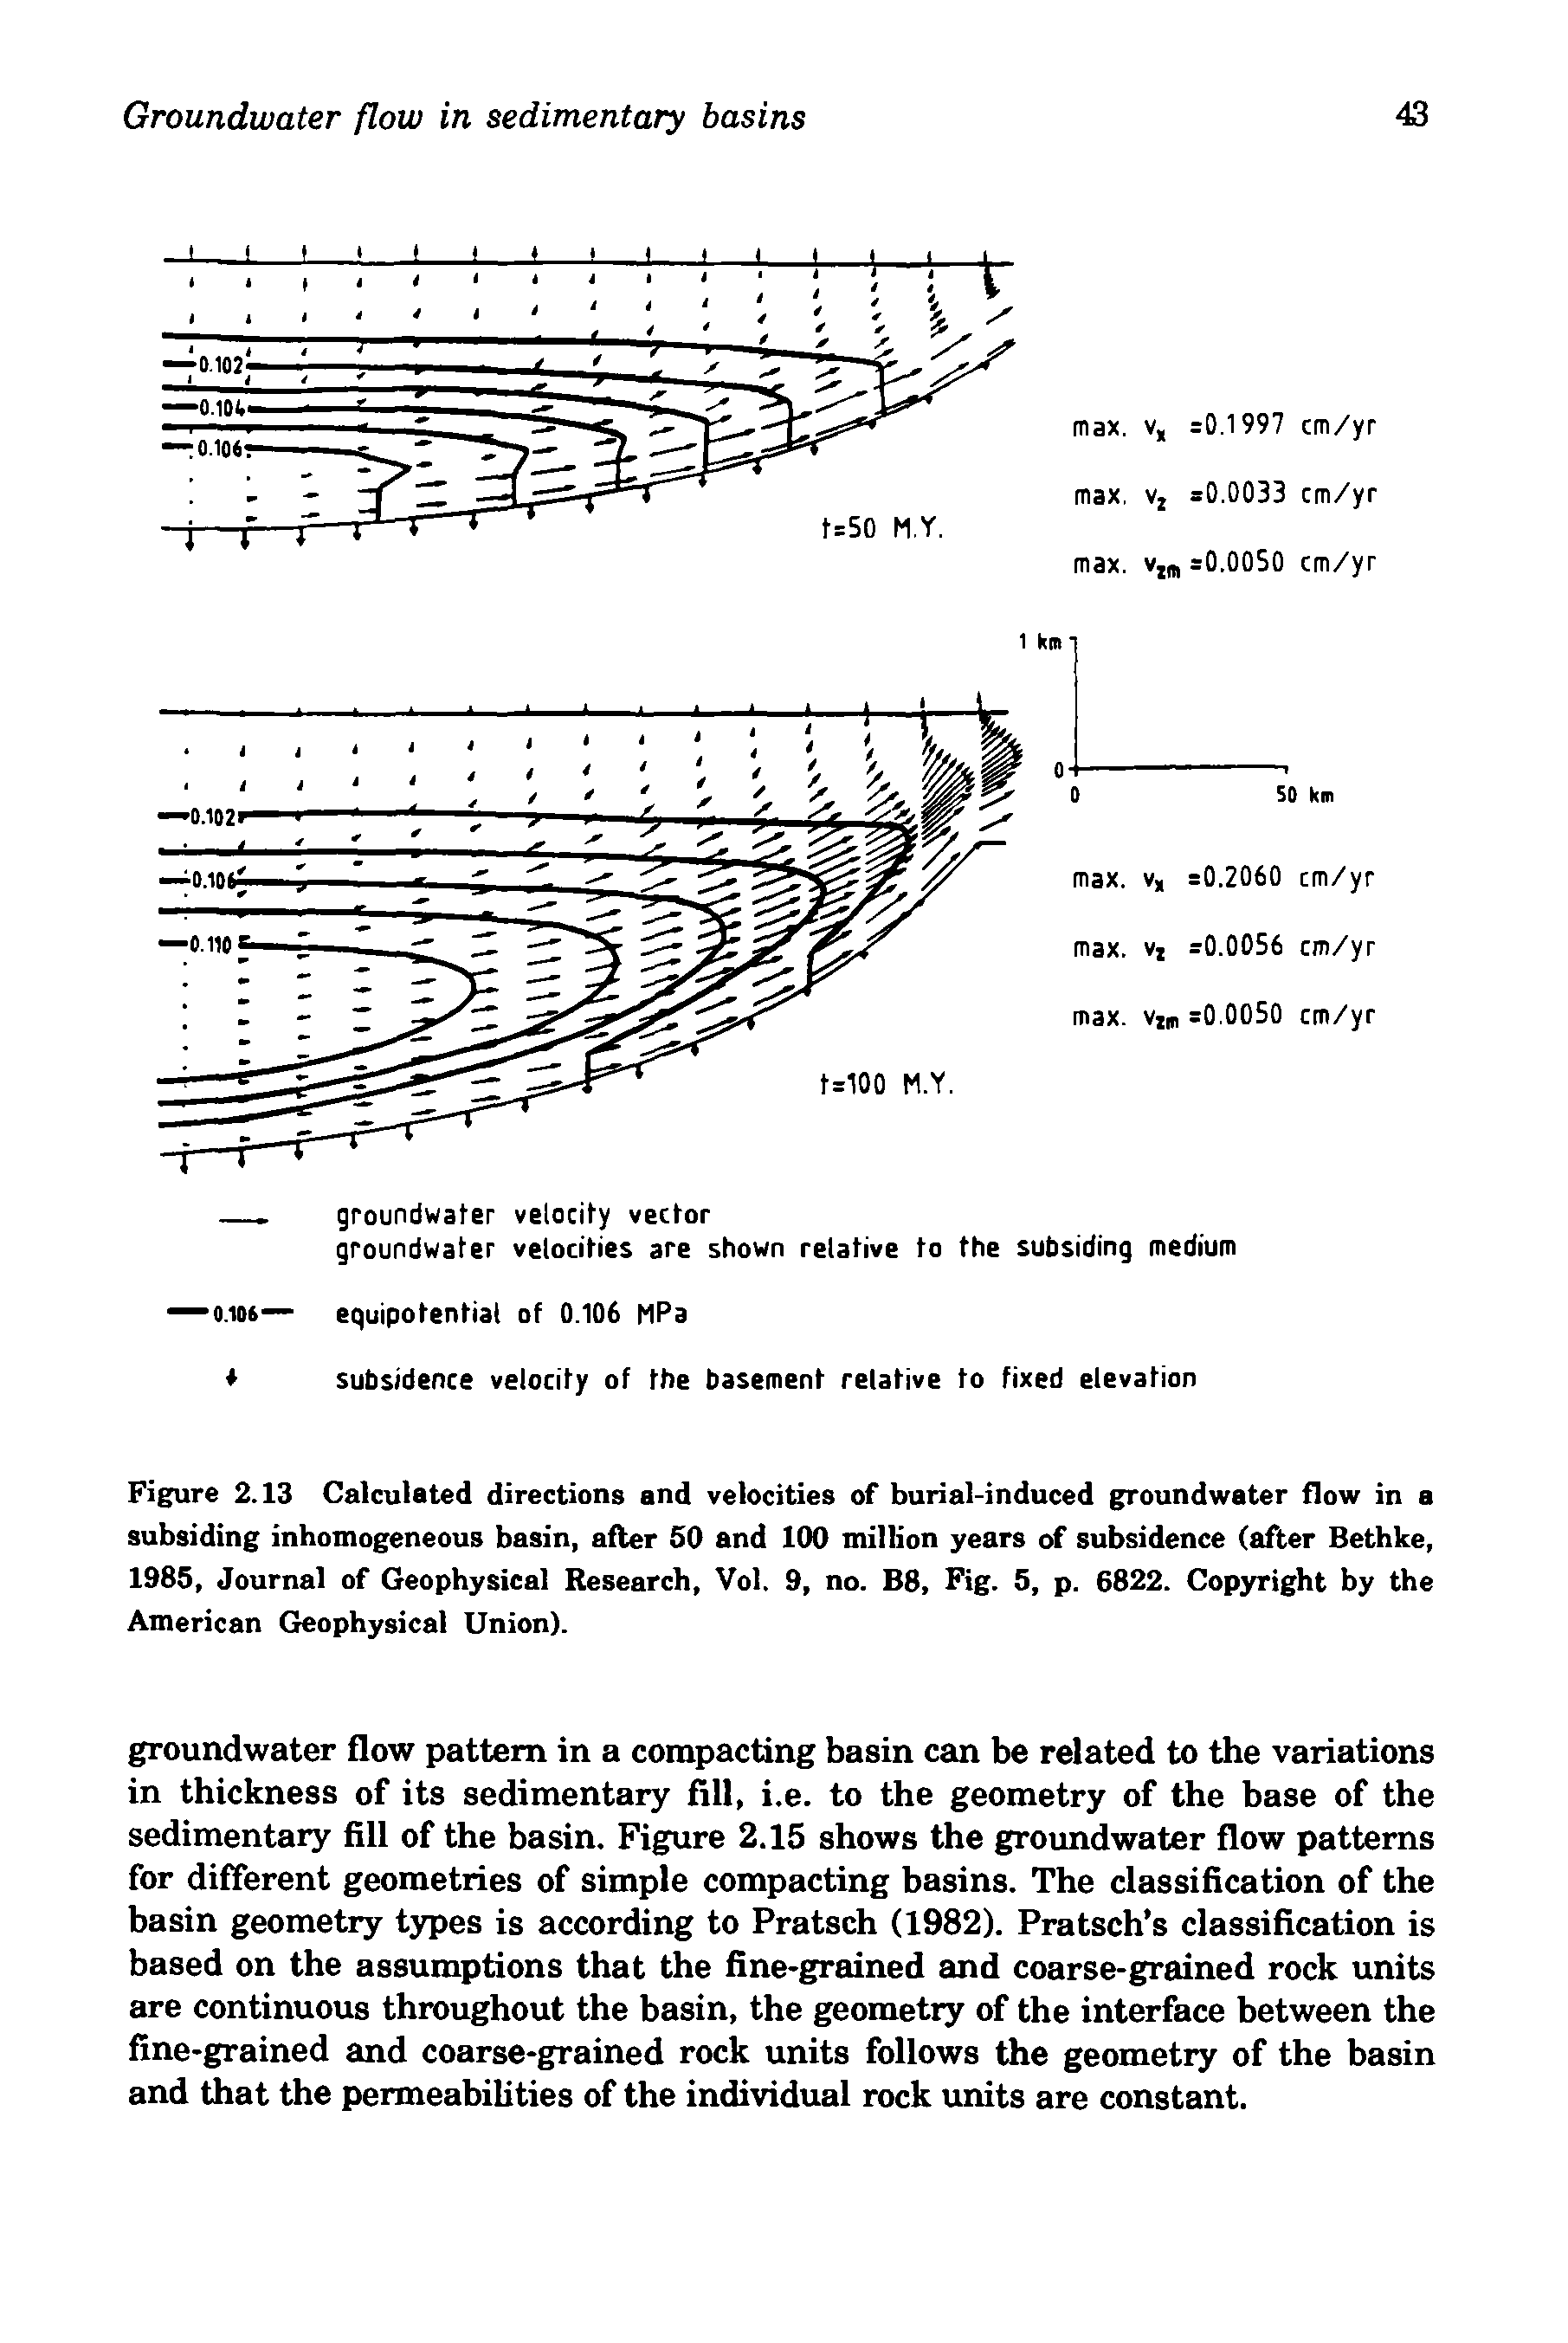 Figure 2.13 Calculated directions and velocities of burial-induced groundwater flow in a subsiding inhomogeneous basin, after 50 and 100 million years of subsidence (after Bethke, 1985, Journal of Geophysical Research, Vol. 9, no. B8, Fig. 5, p. 6822. Copyright by the American Geophysical Union).